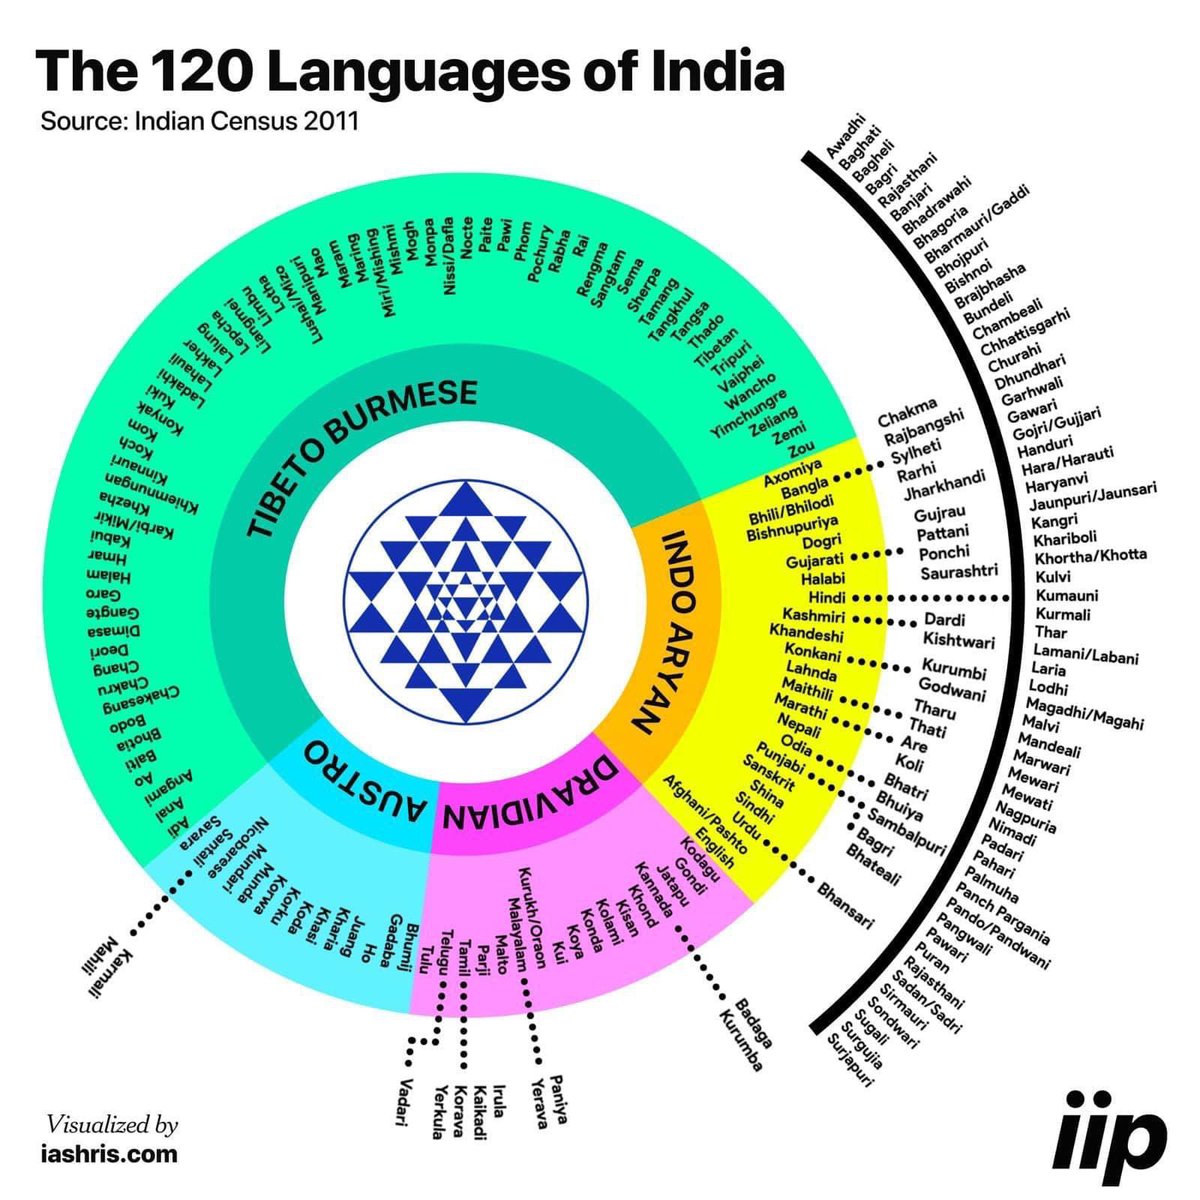 #LanguagesofIndia 60% of different Languages spoken in India are from NorthEast